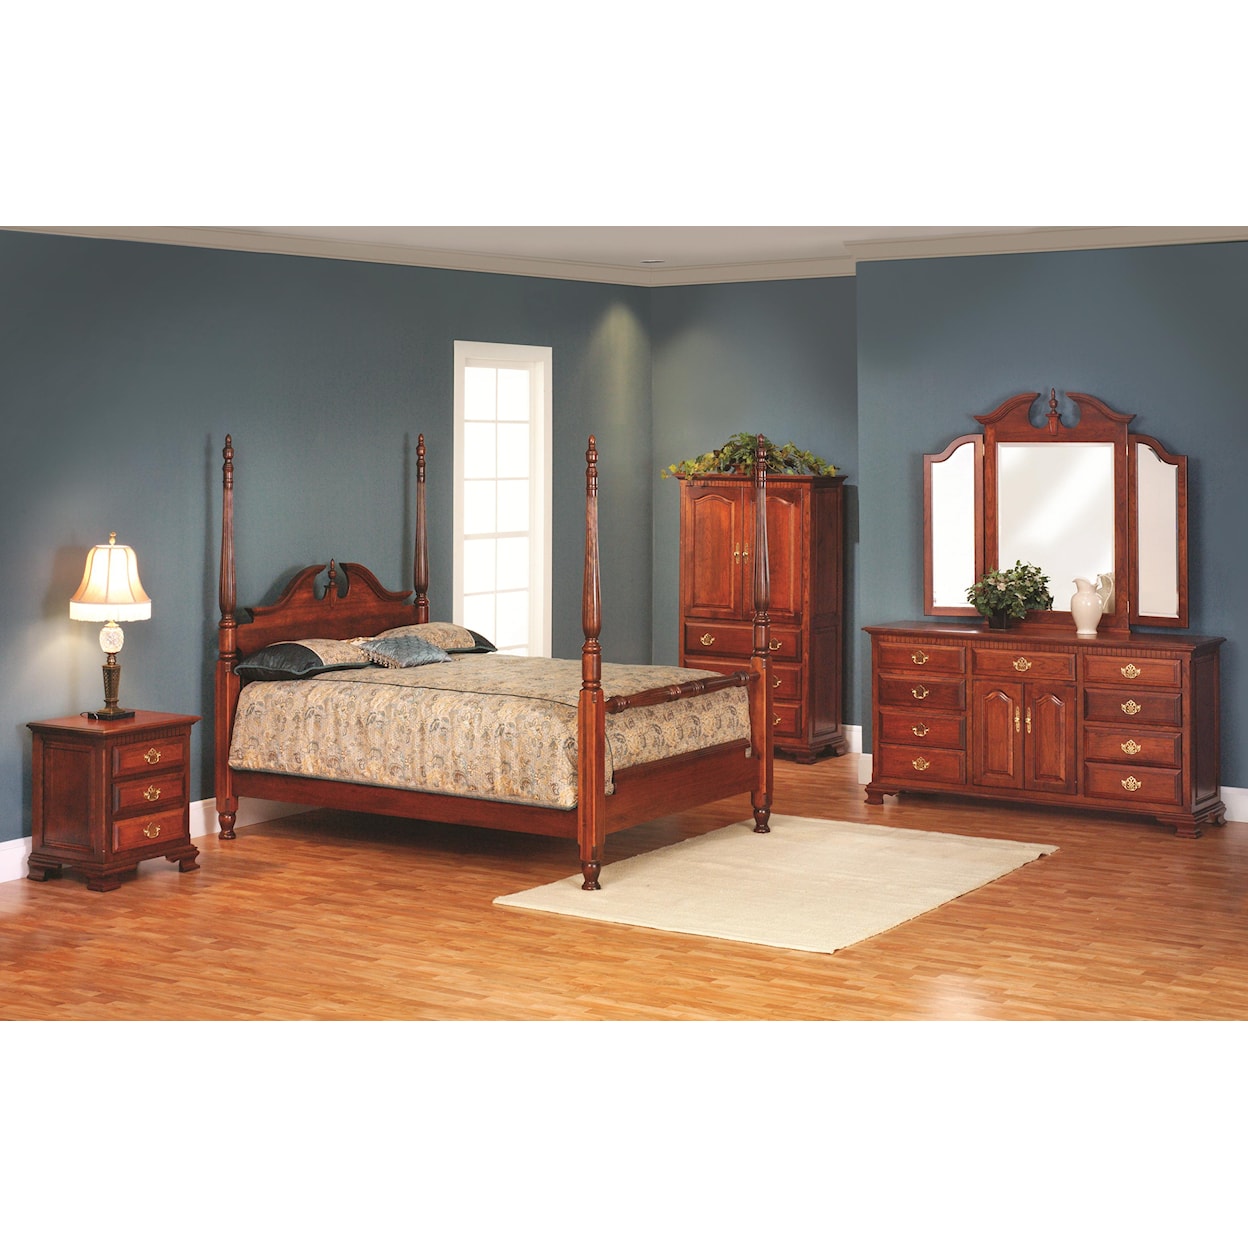 Millcraft Victorias Tradition Full Poster Bedroom Group